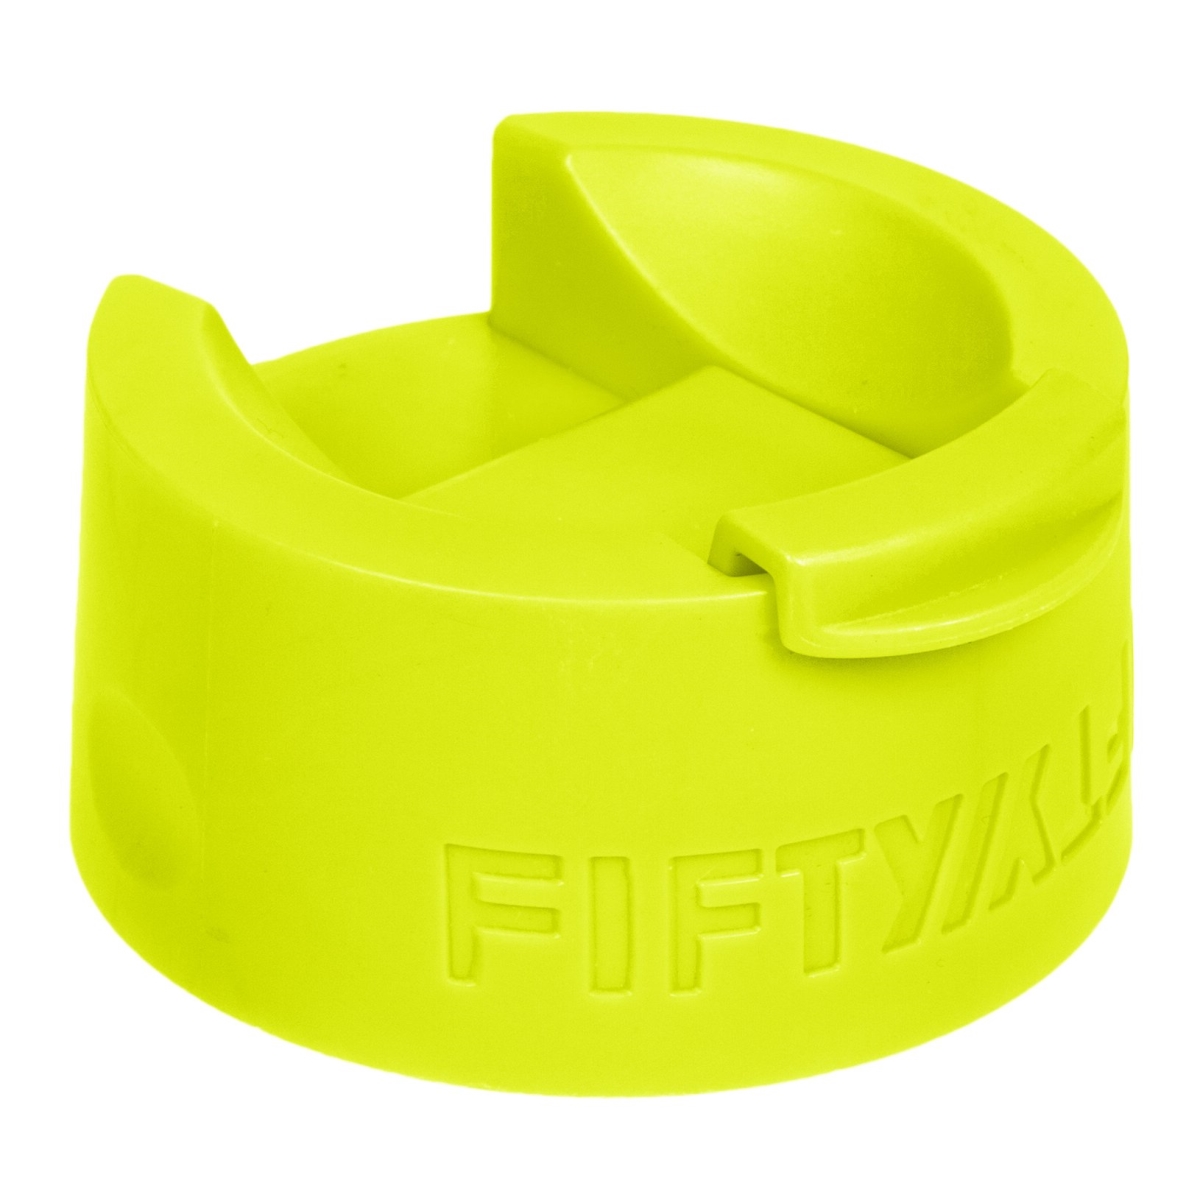 A68003lm0 Fifty & Fifty Wide-mouth Coffee Flip-top Cap, Lime Green